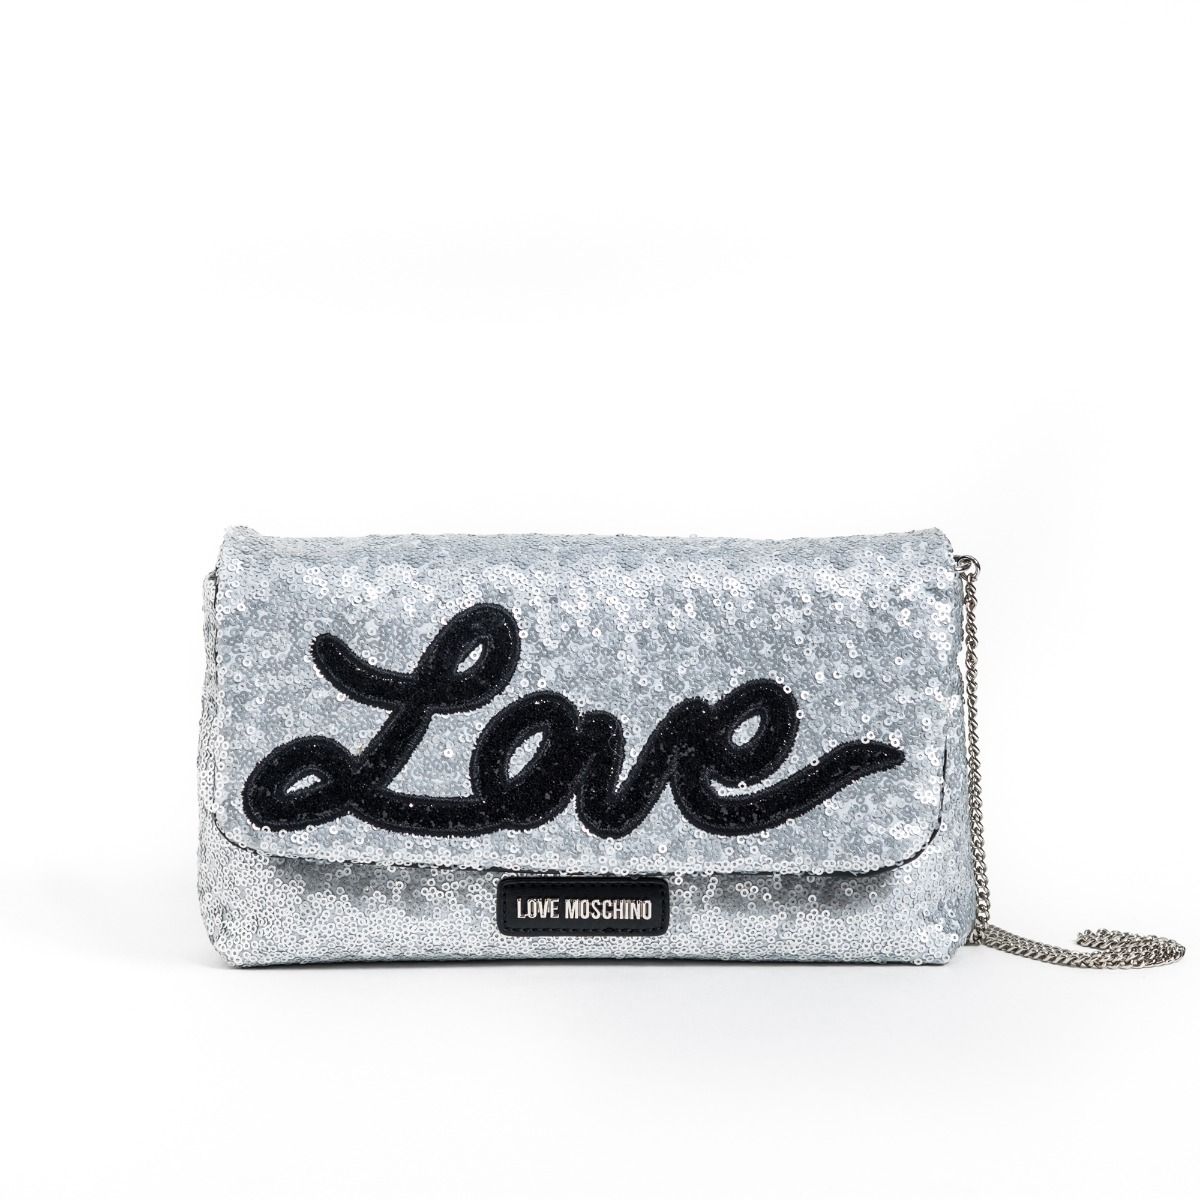 Valentine's Day Gifts for that Special Someone, Valentine's gifts for her, love Moschino Love sequin clutch